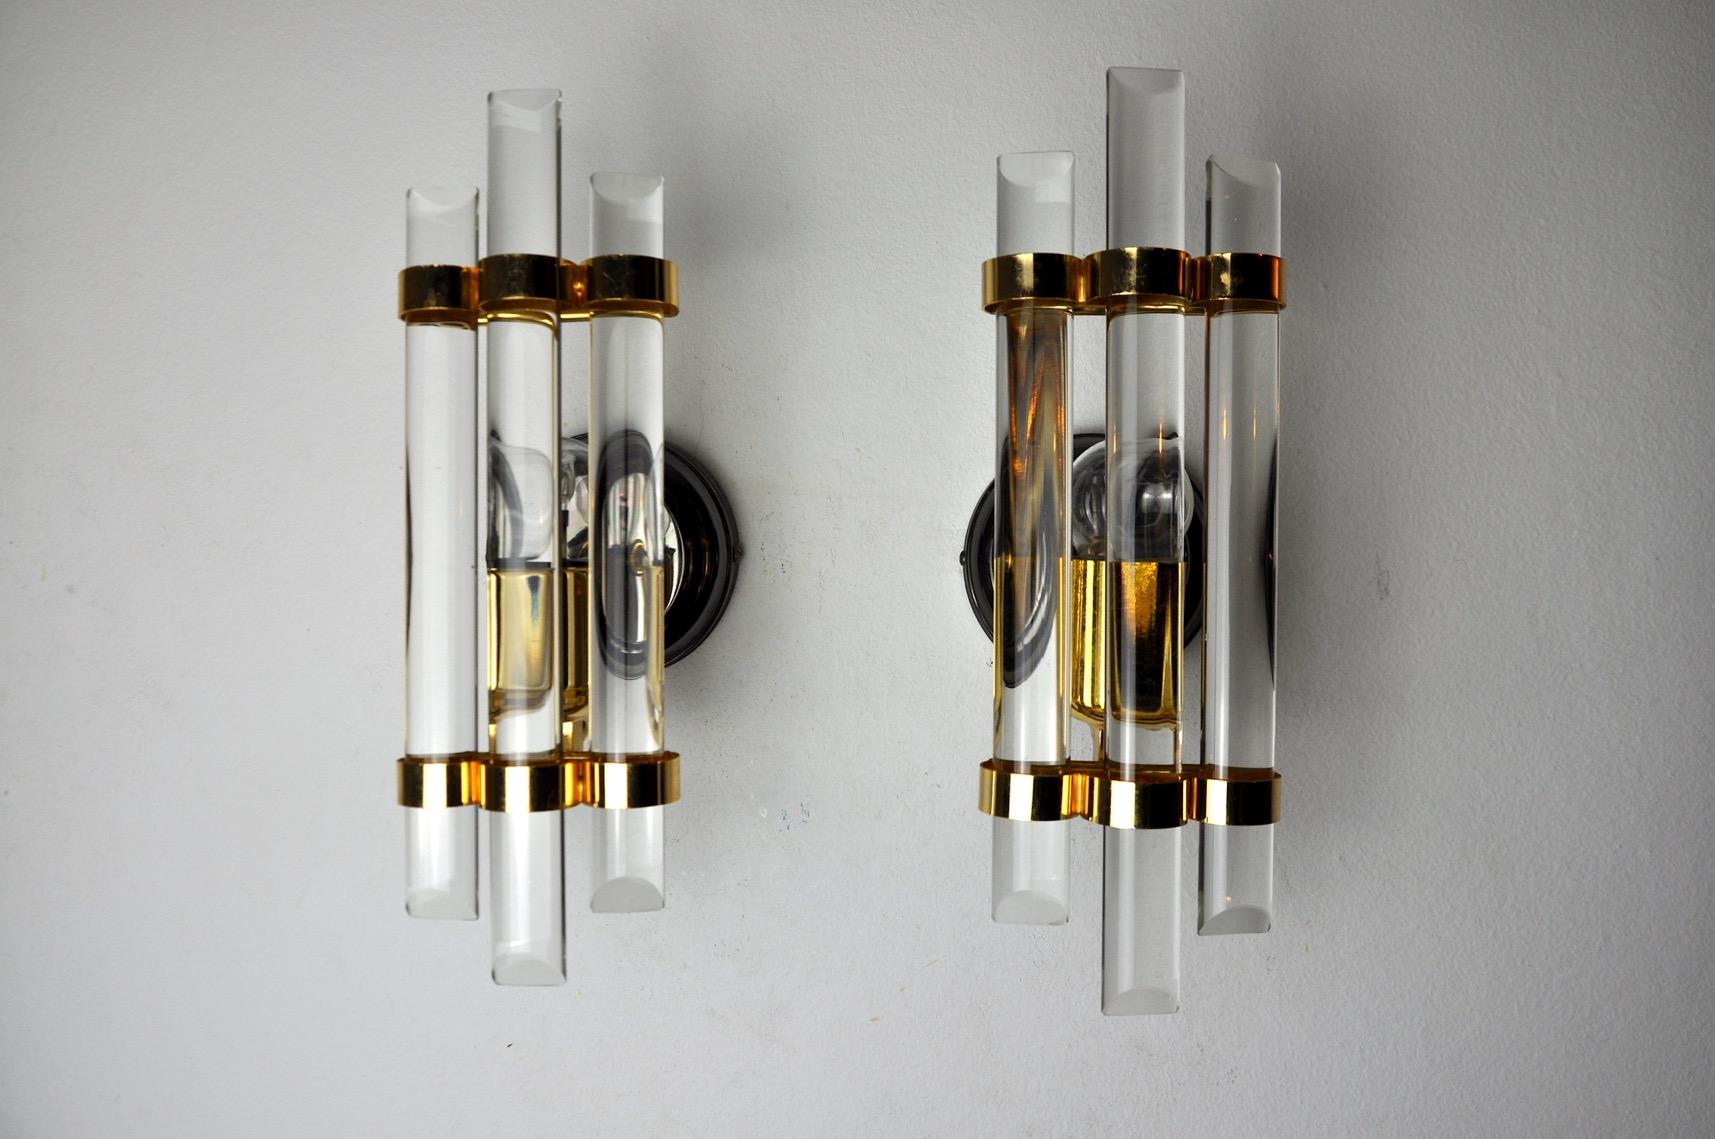 Very nice pair of venini wall lights produced in italy in the 70s. Cut glass and gilt metal structure. Unique object that will illuminate wonderfully and bring a real design touch to your interior. Electricity checked, mark of time in accordance